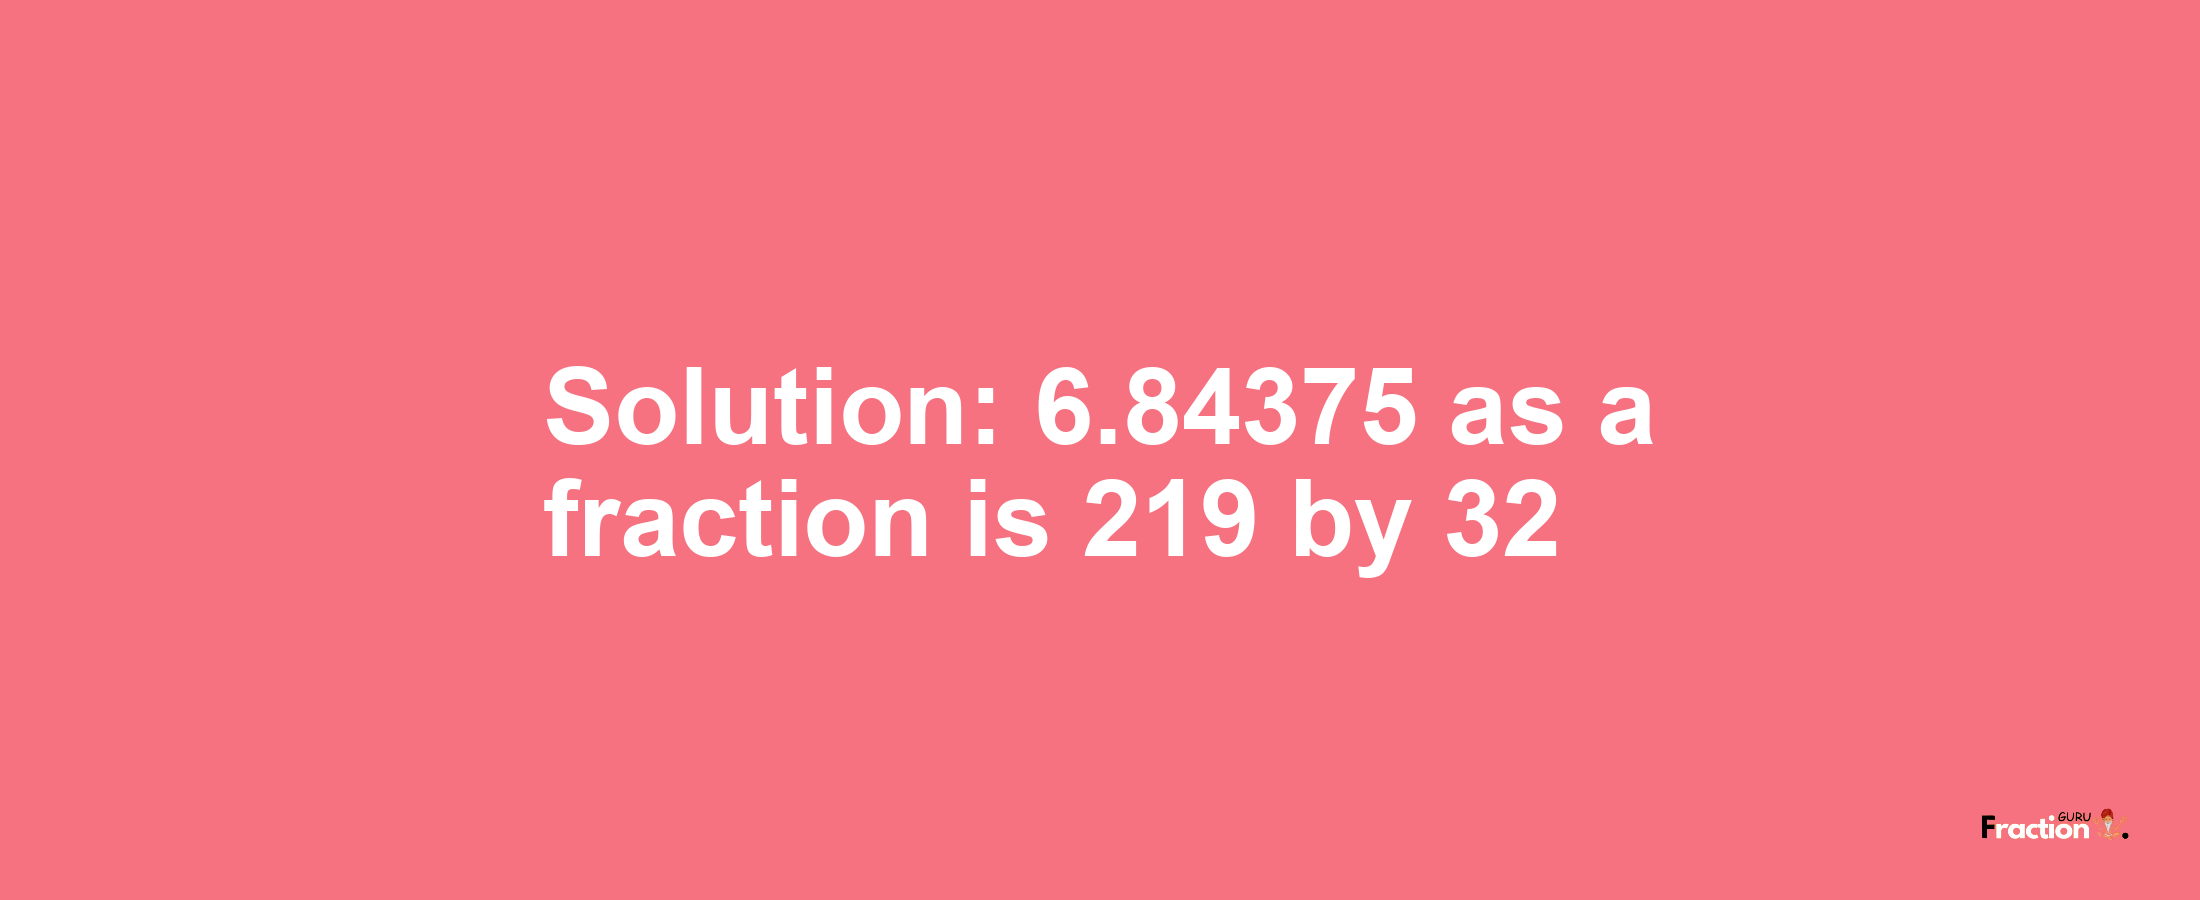 Solution:6.84375 as a fraction is 219/32